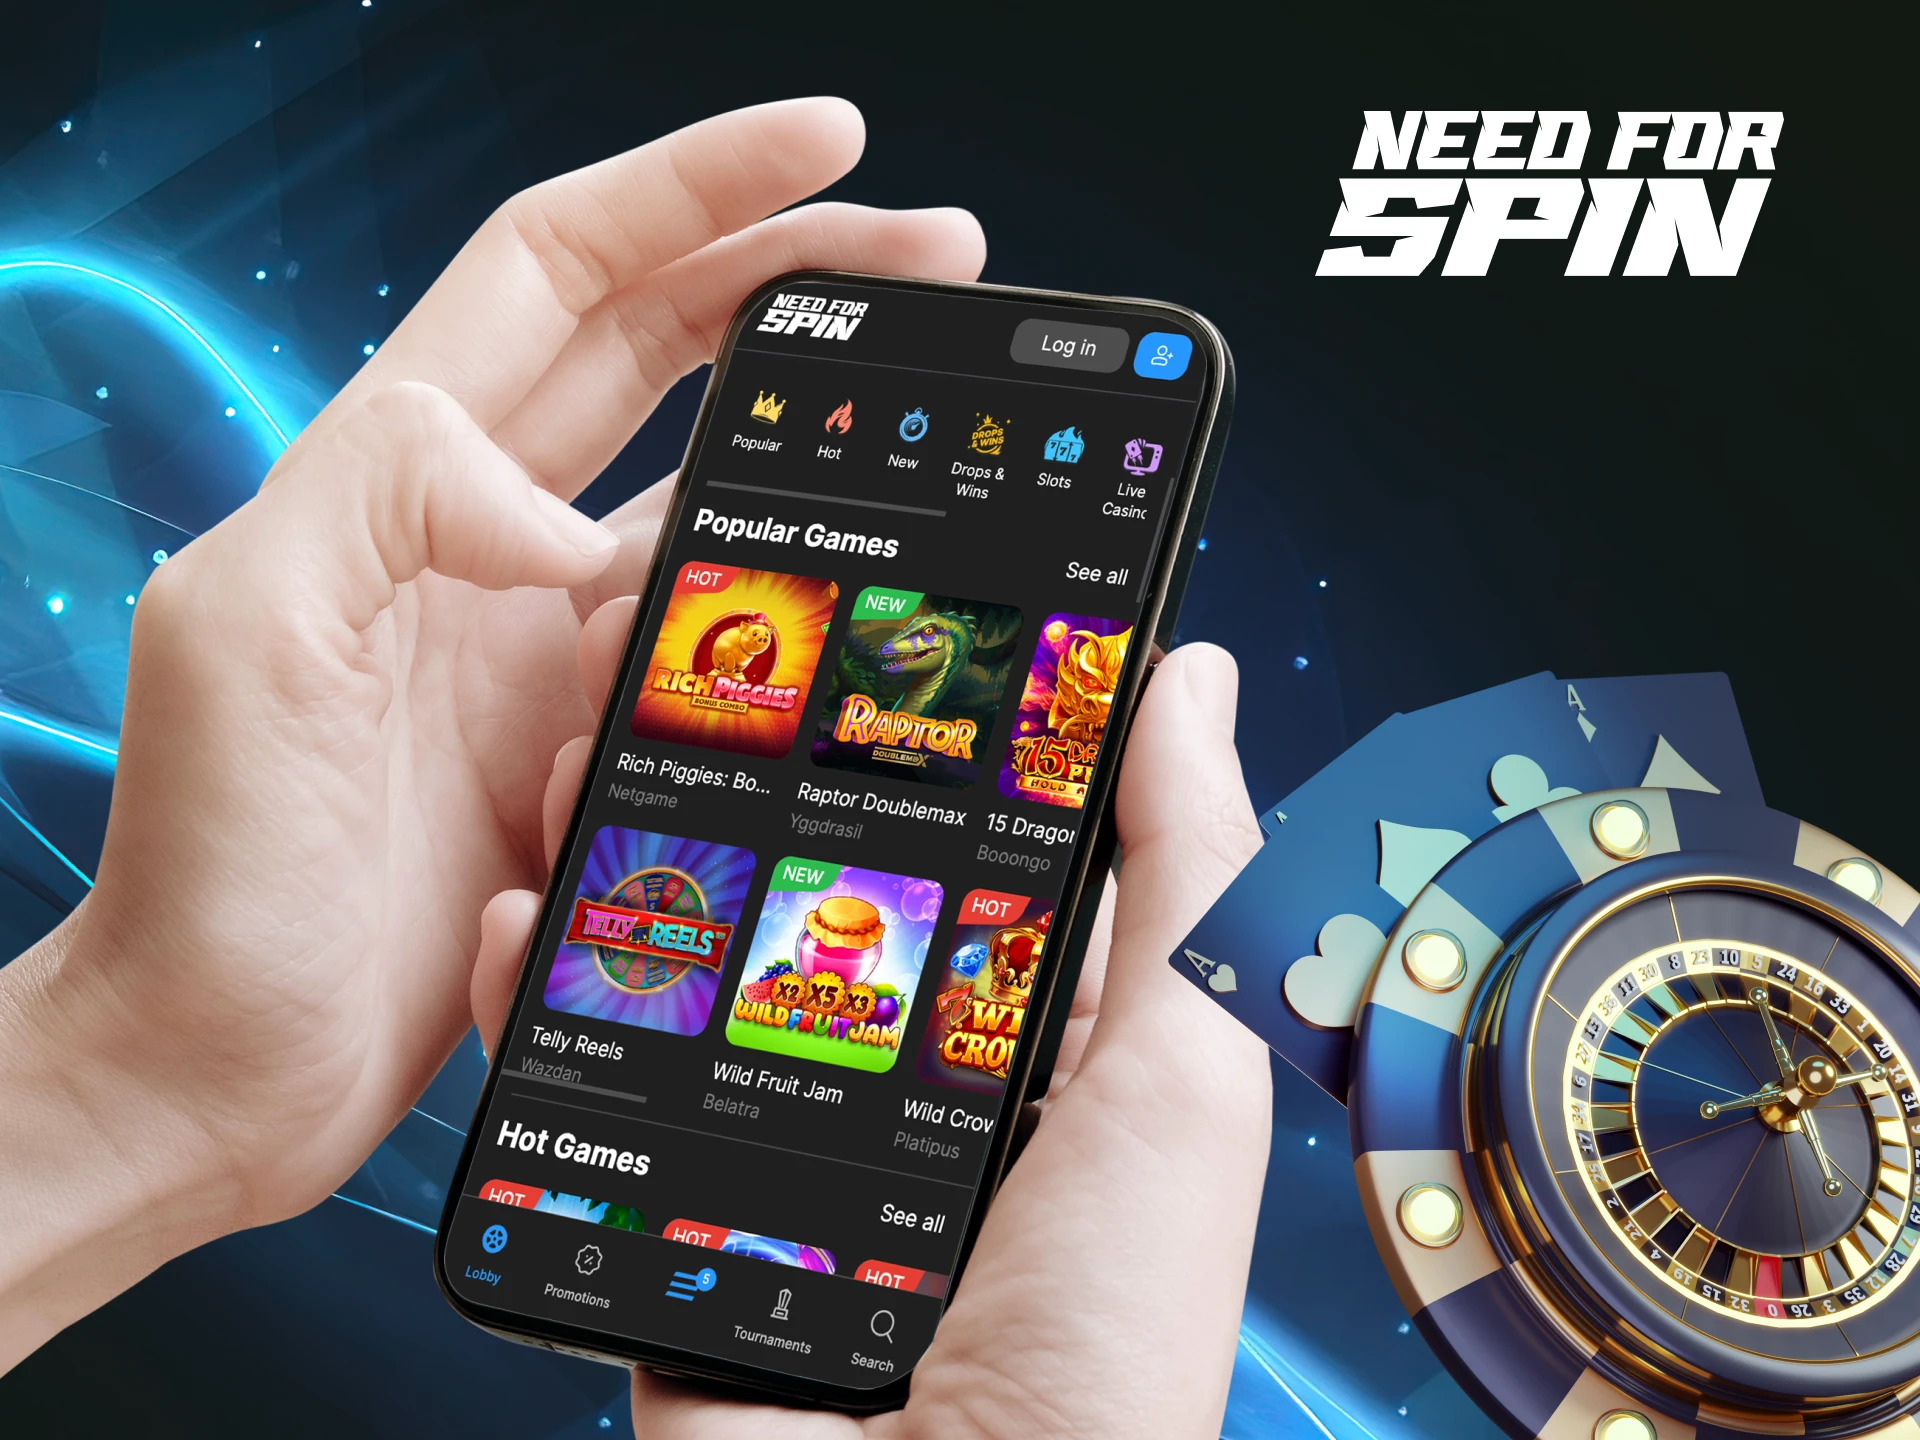 What do I need to do to be able to play on the Need for Spin online casino site.